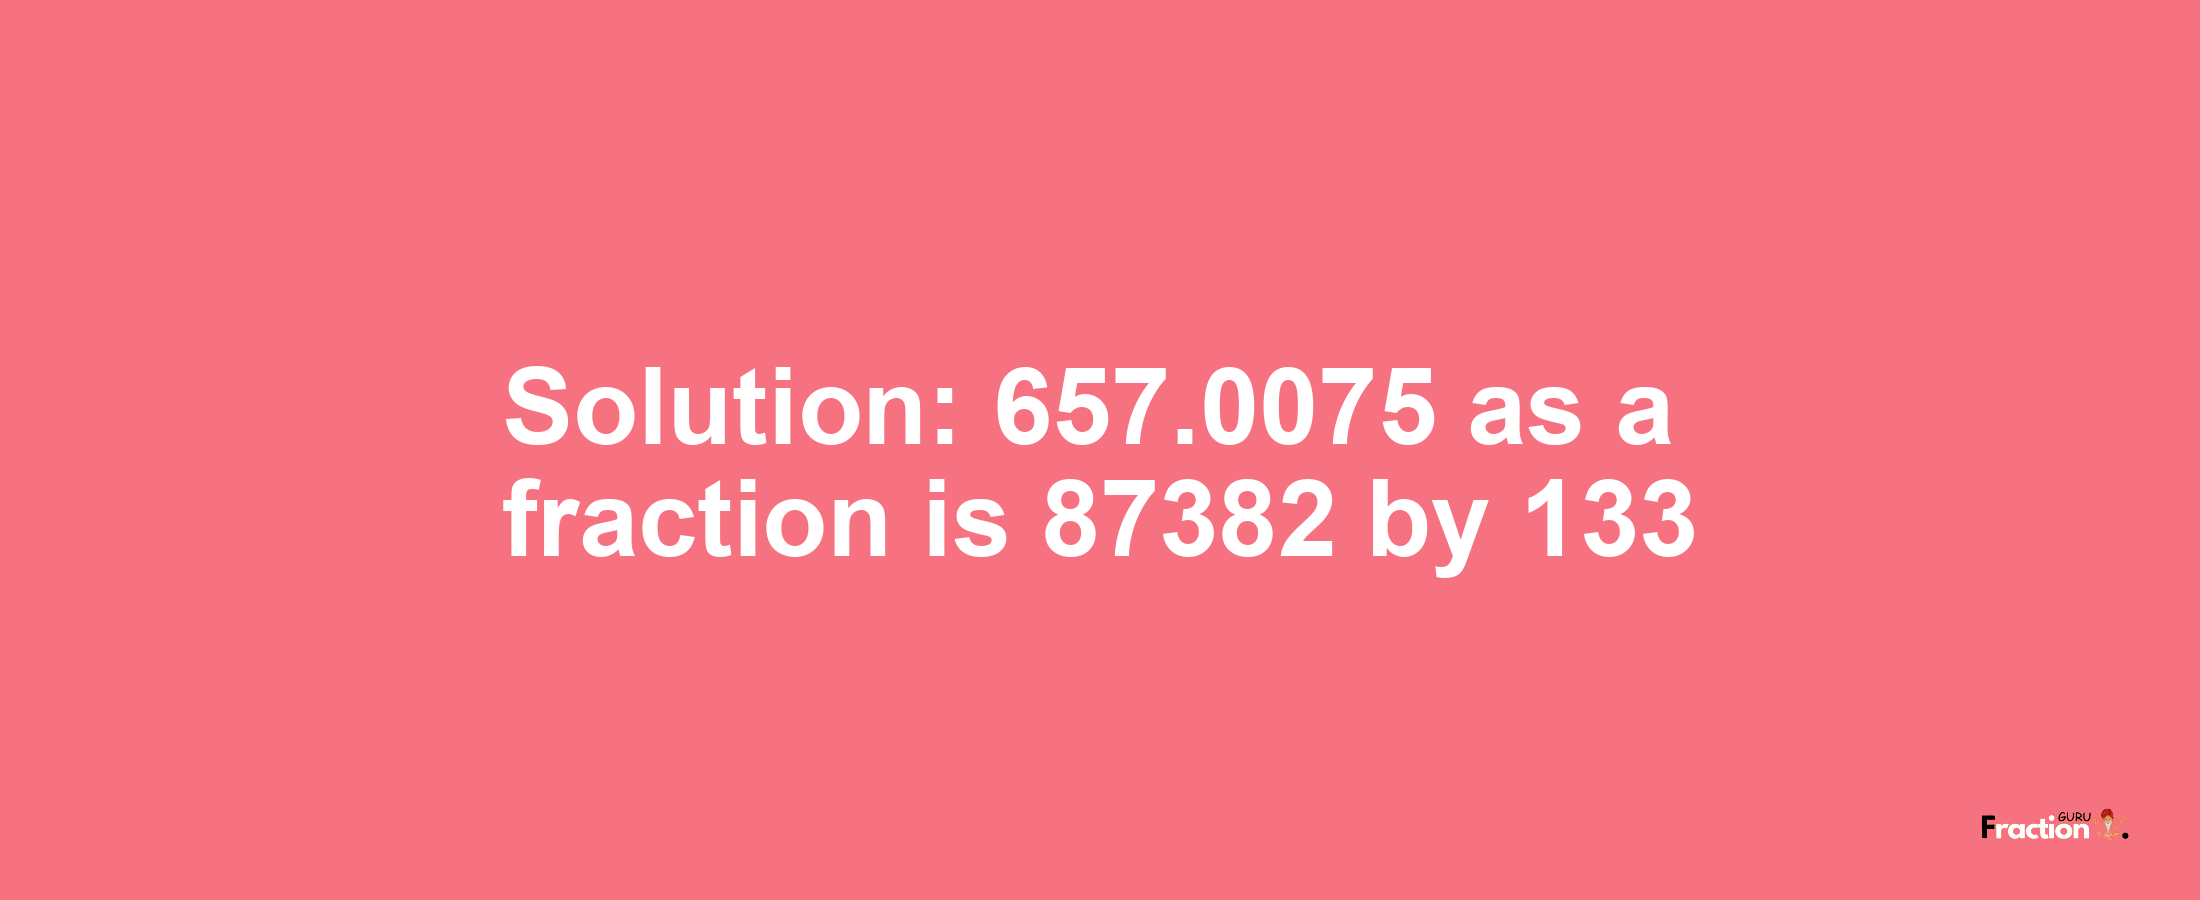 Solution:657.0075 as a fraction is 87382/133